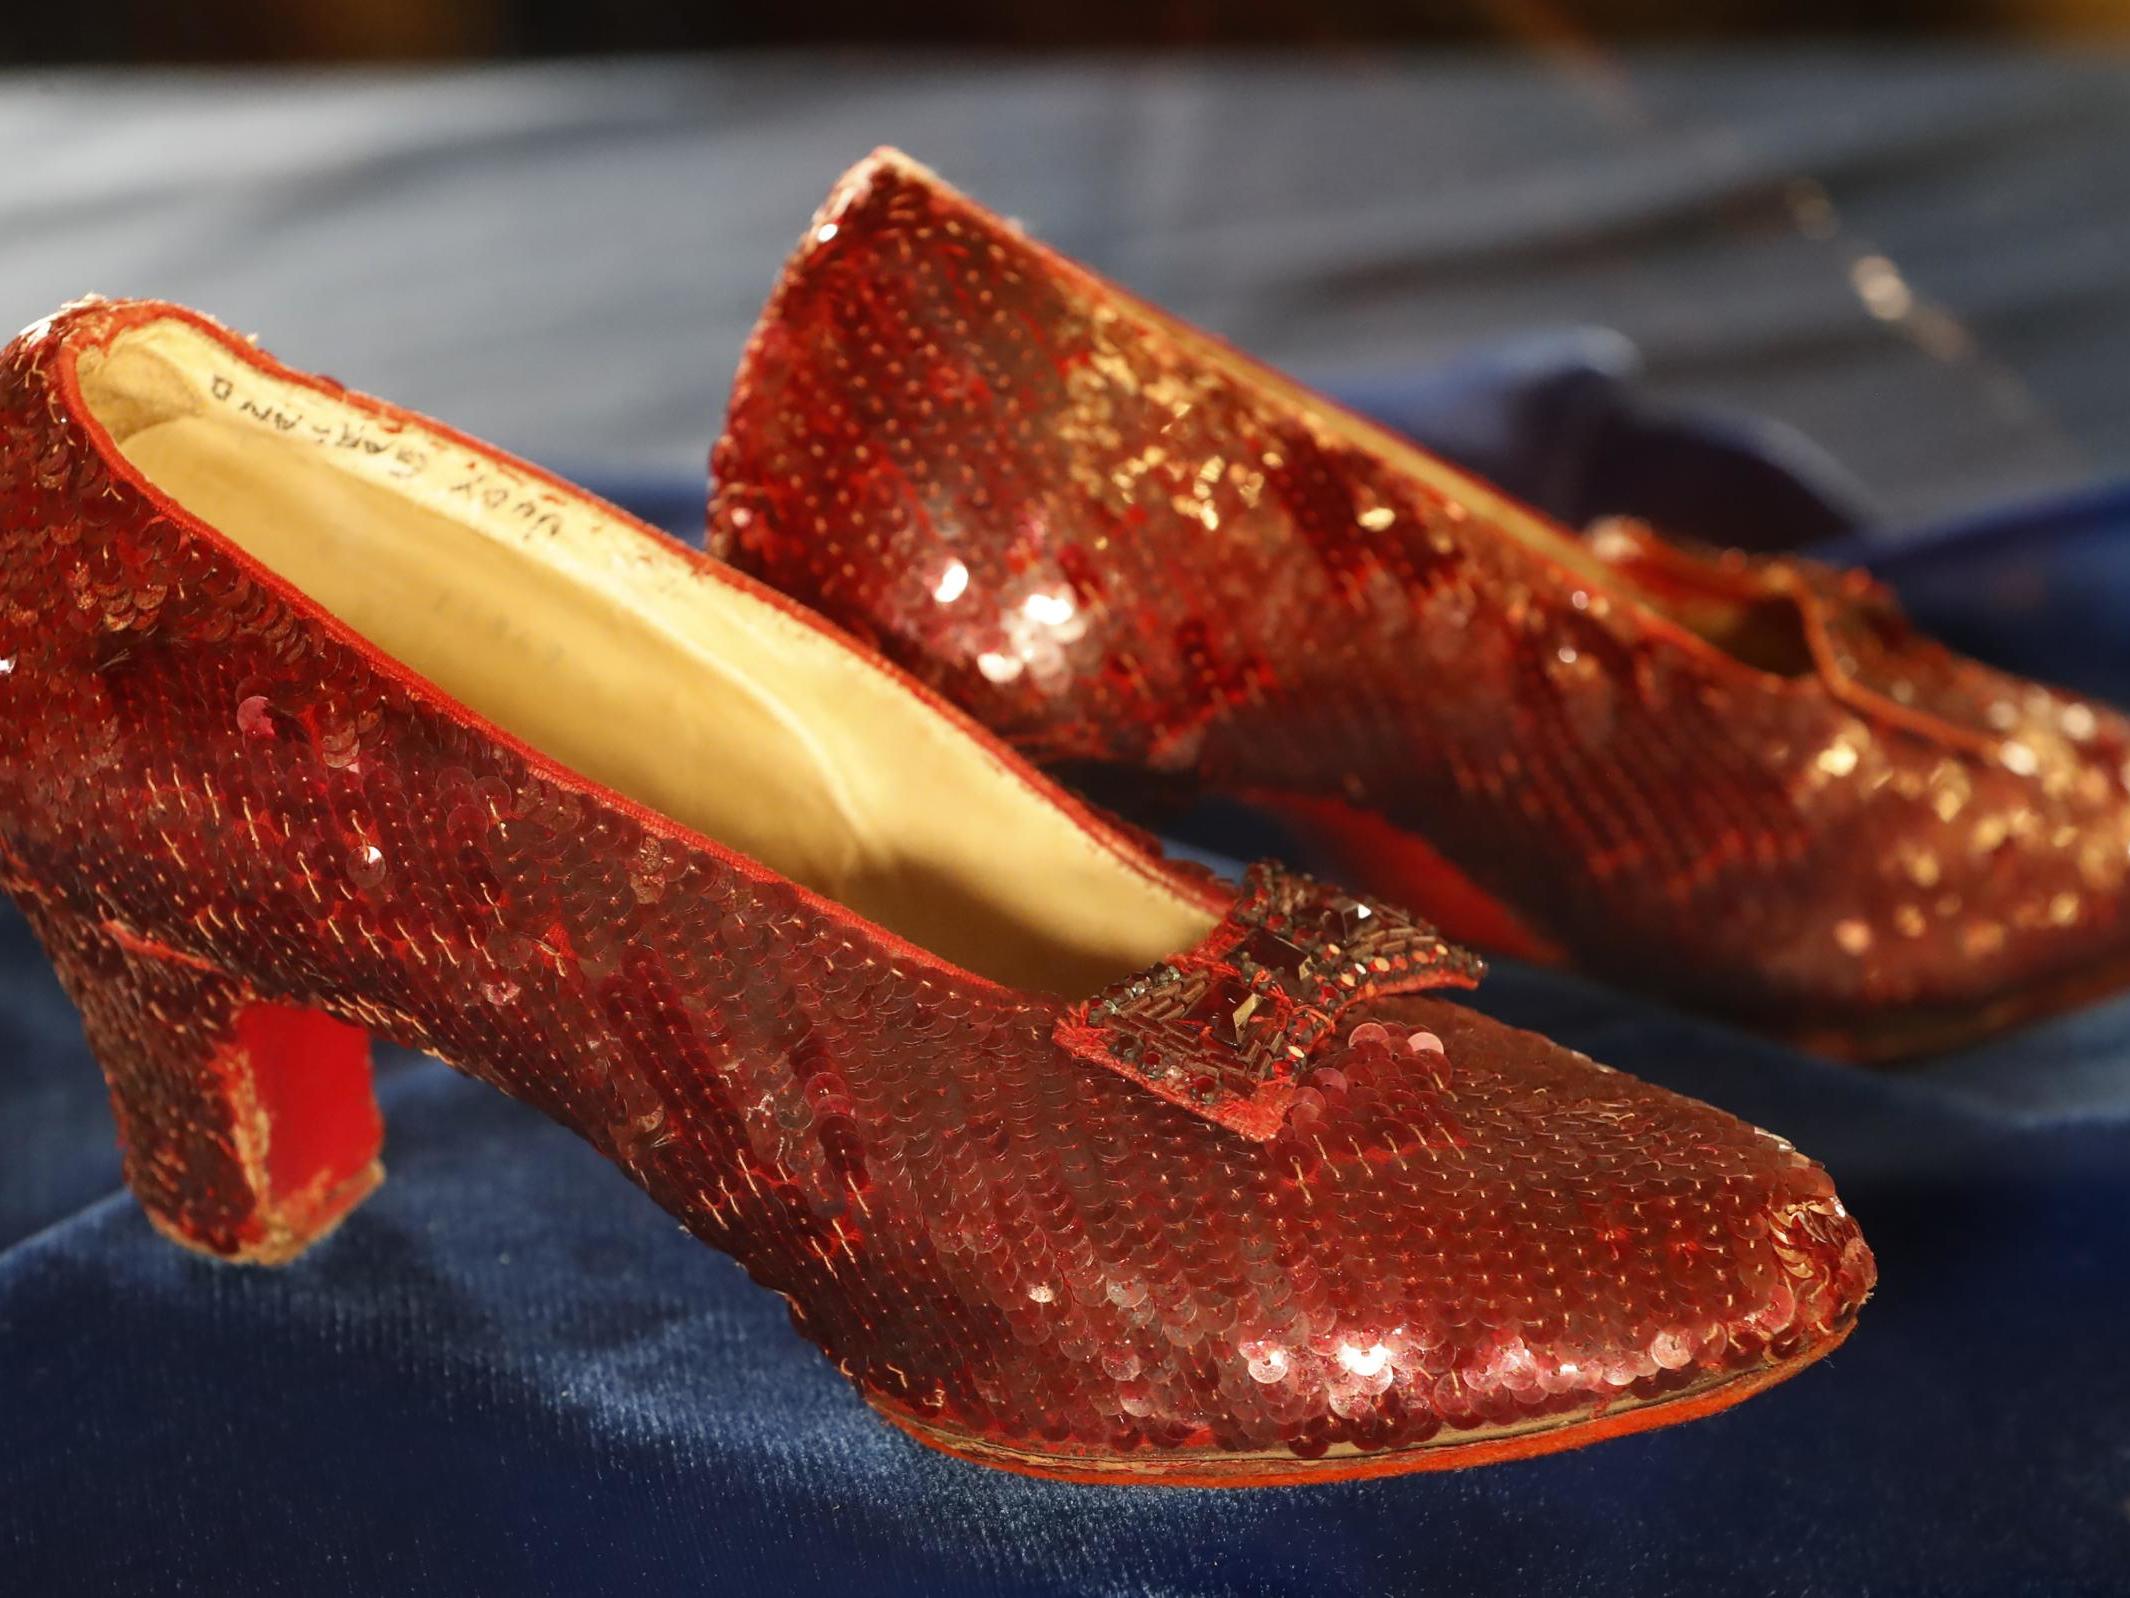 Stolen ruby slippers from Wizard of Oz found by FBI after 13 years ...